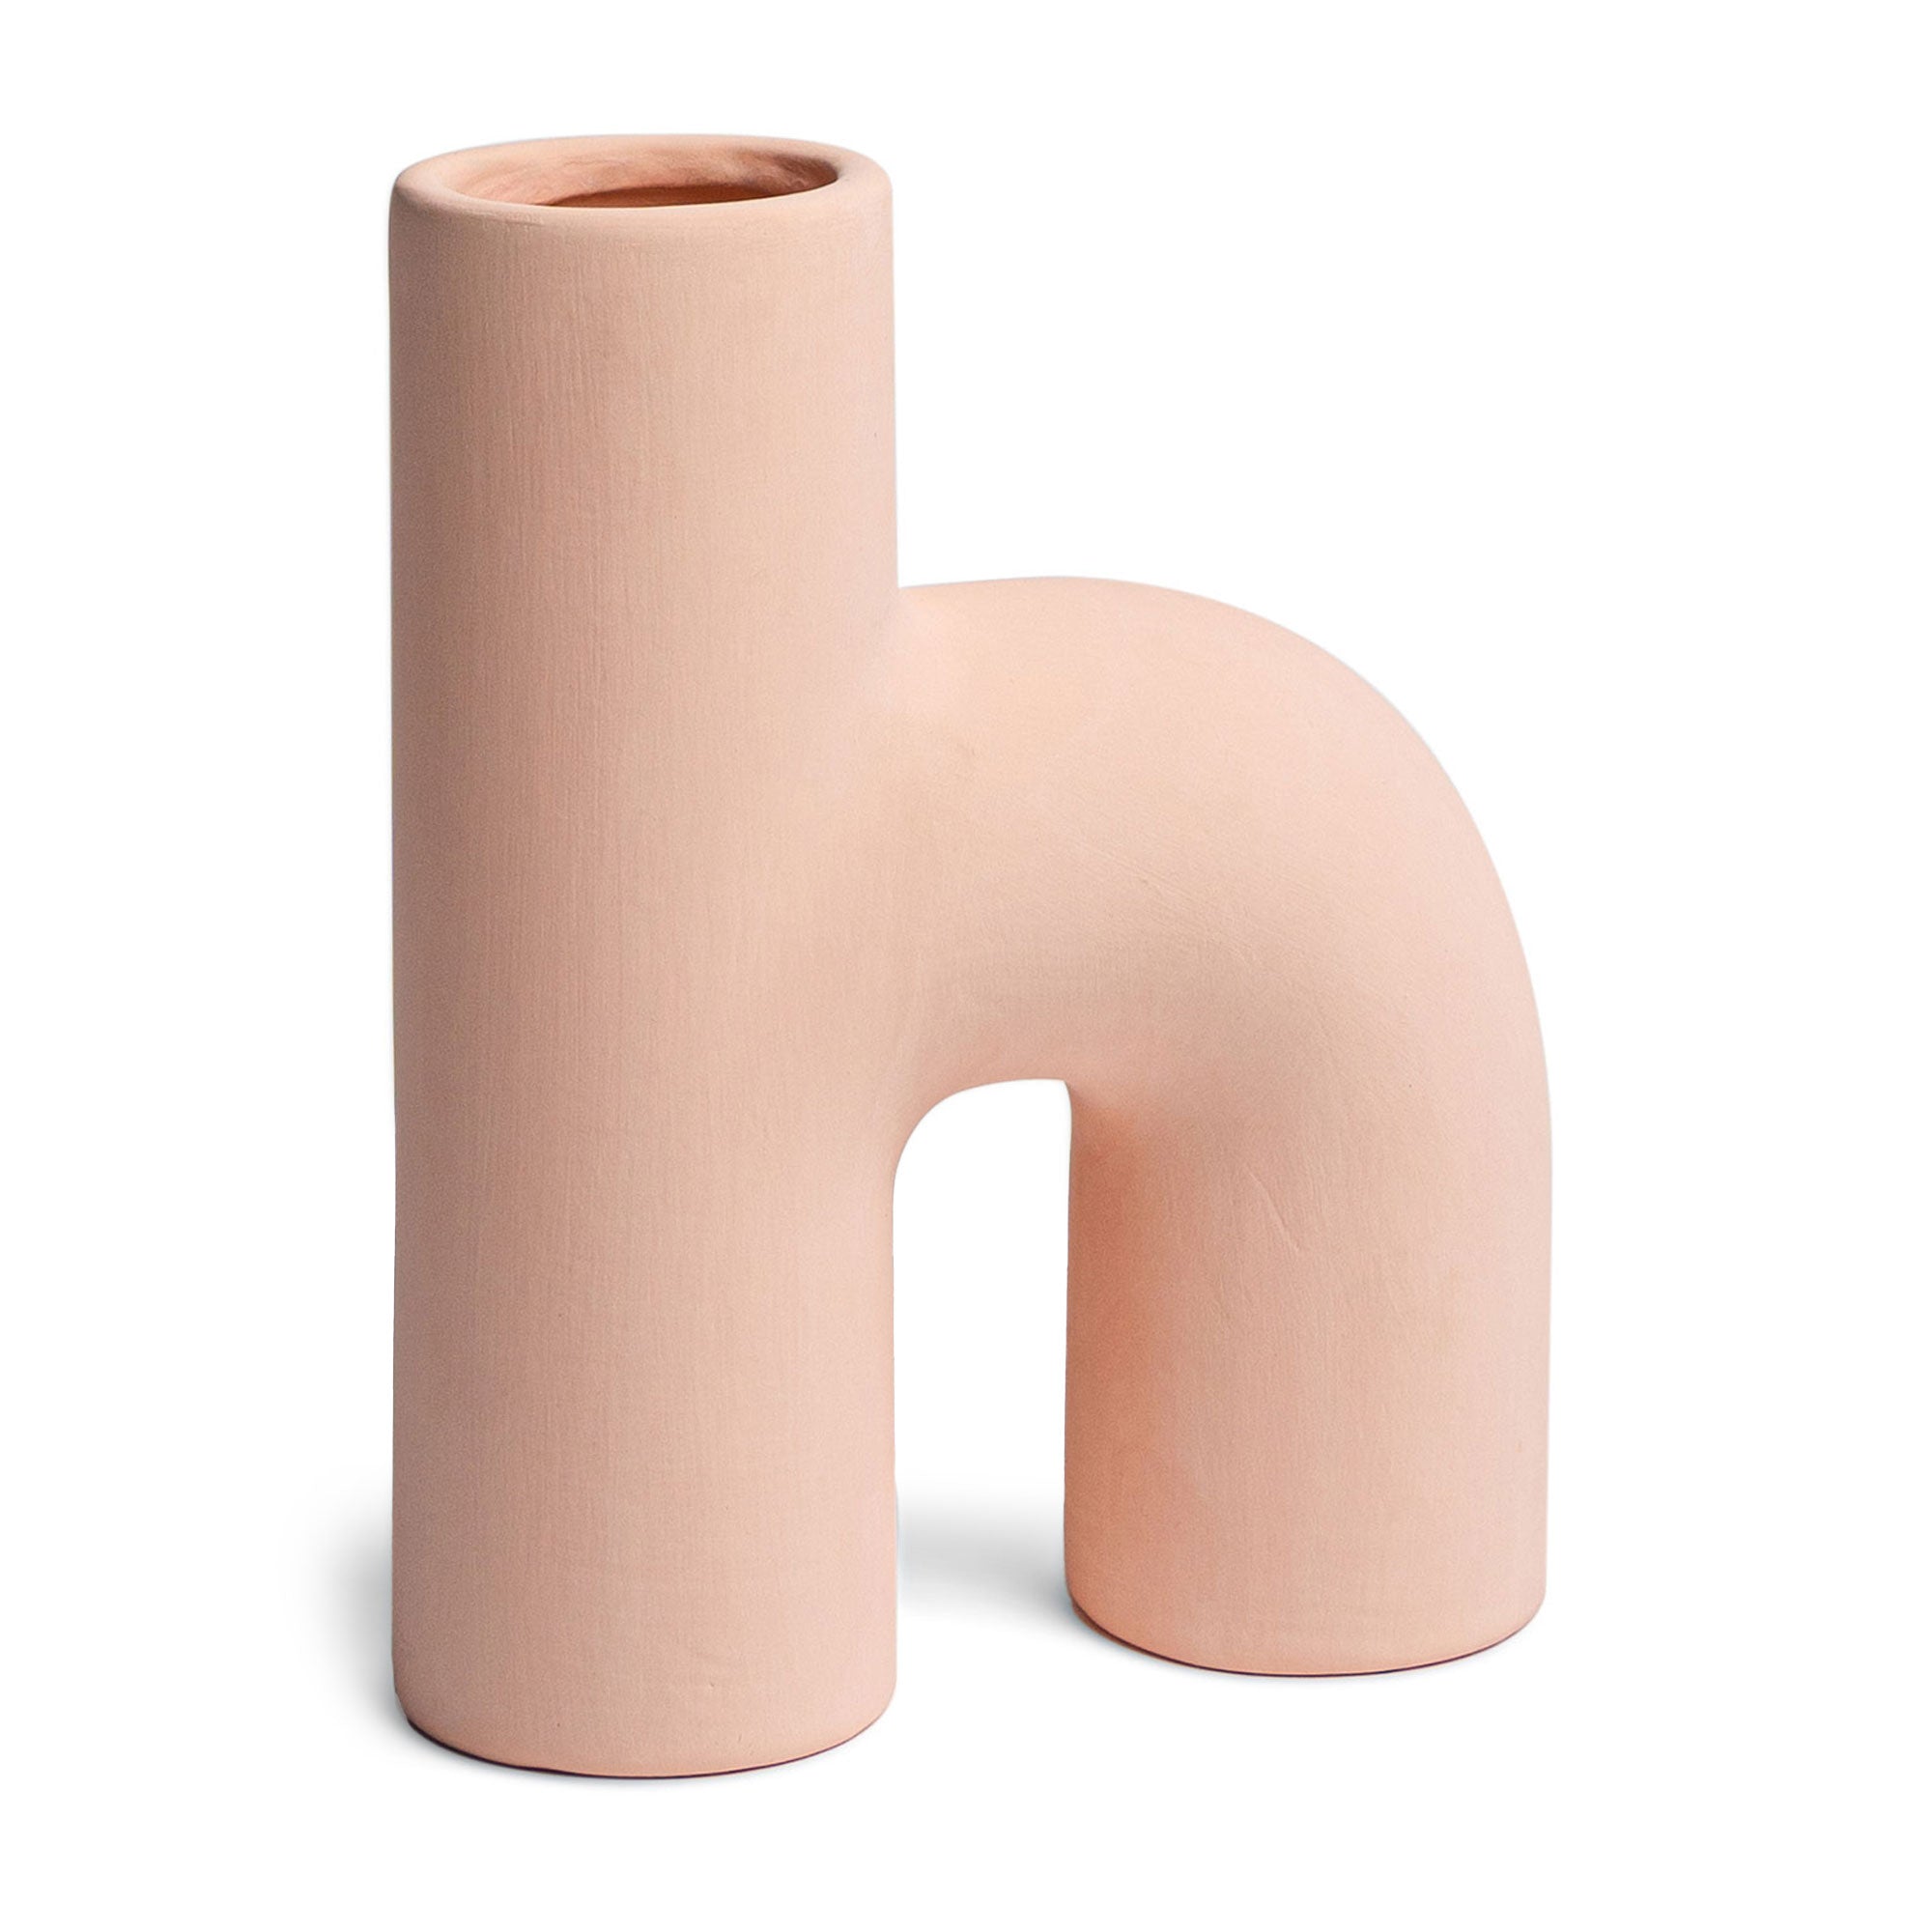 Lila Abstract Sculptural Decorative Modern Vase in Pink in Decorative by Maven Lane